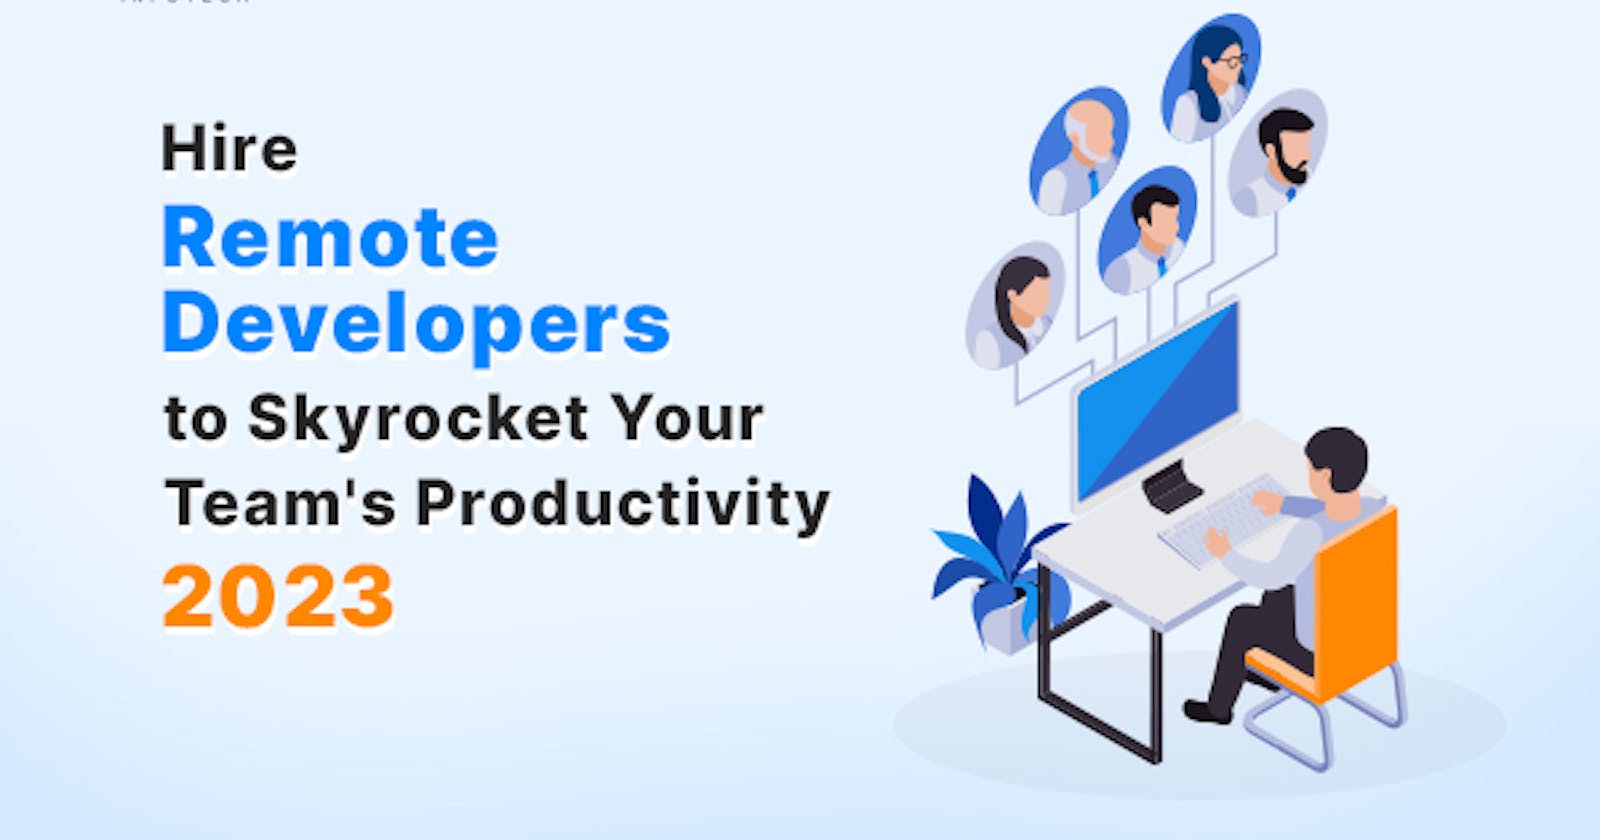 How to Hire Remote Developers to Skyrocket Your Team's Productivity